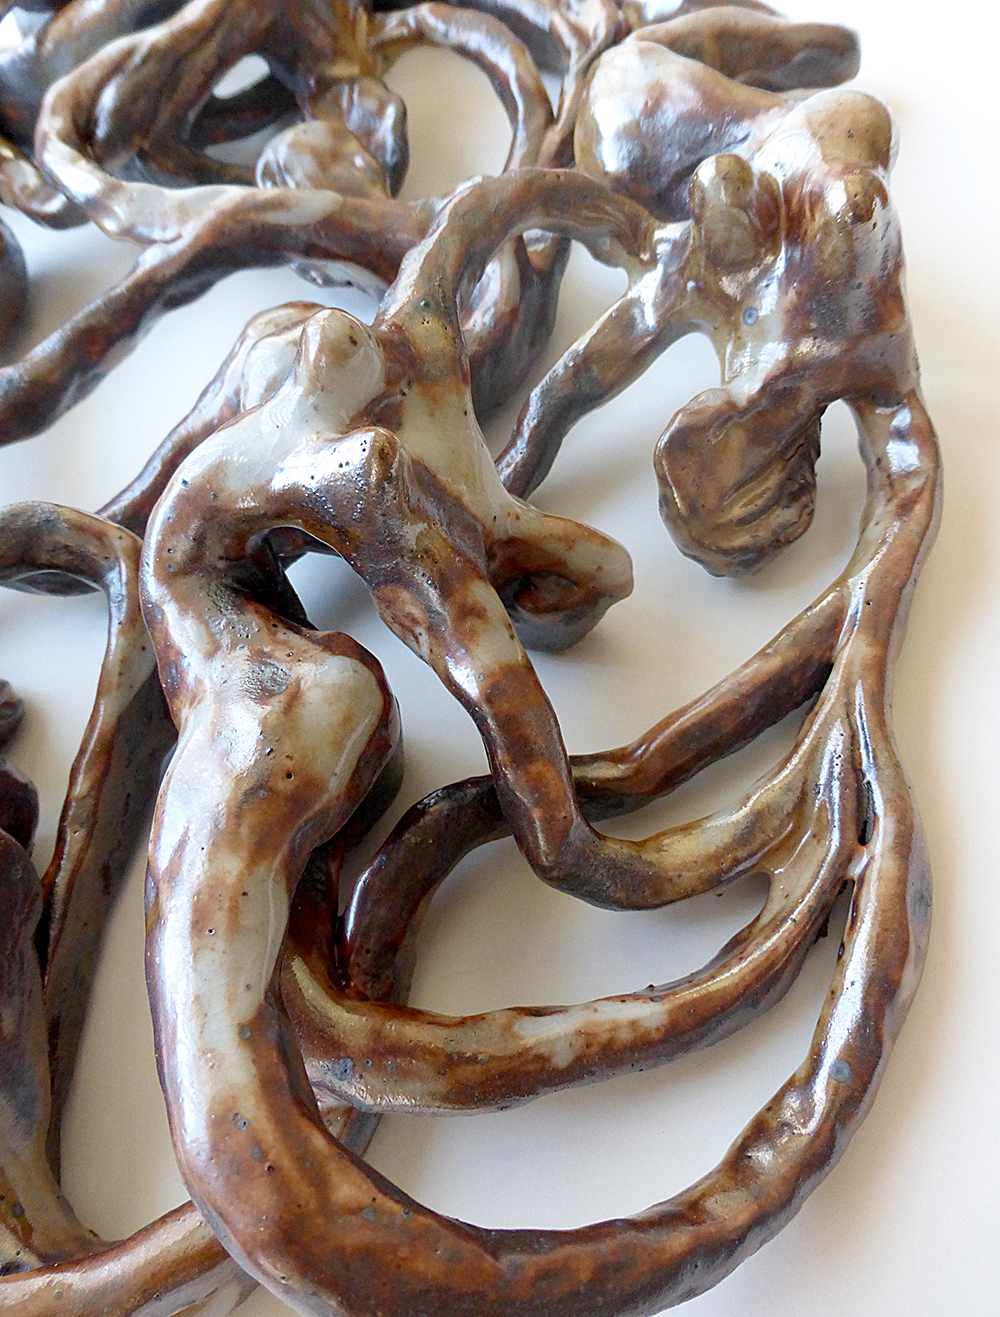 organic female erotic nude women earth sexuality creature mythology underwater Nature bodies sculpture glass ceramic